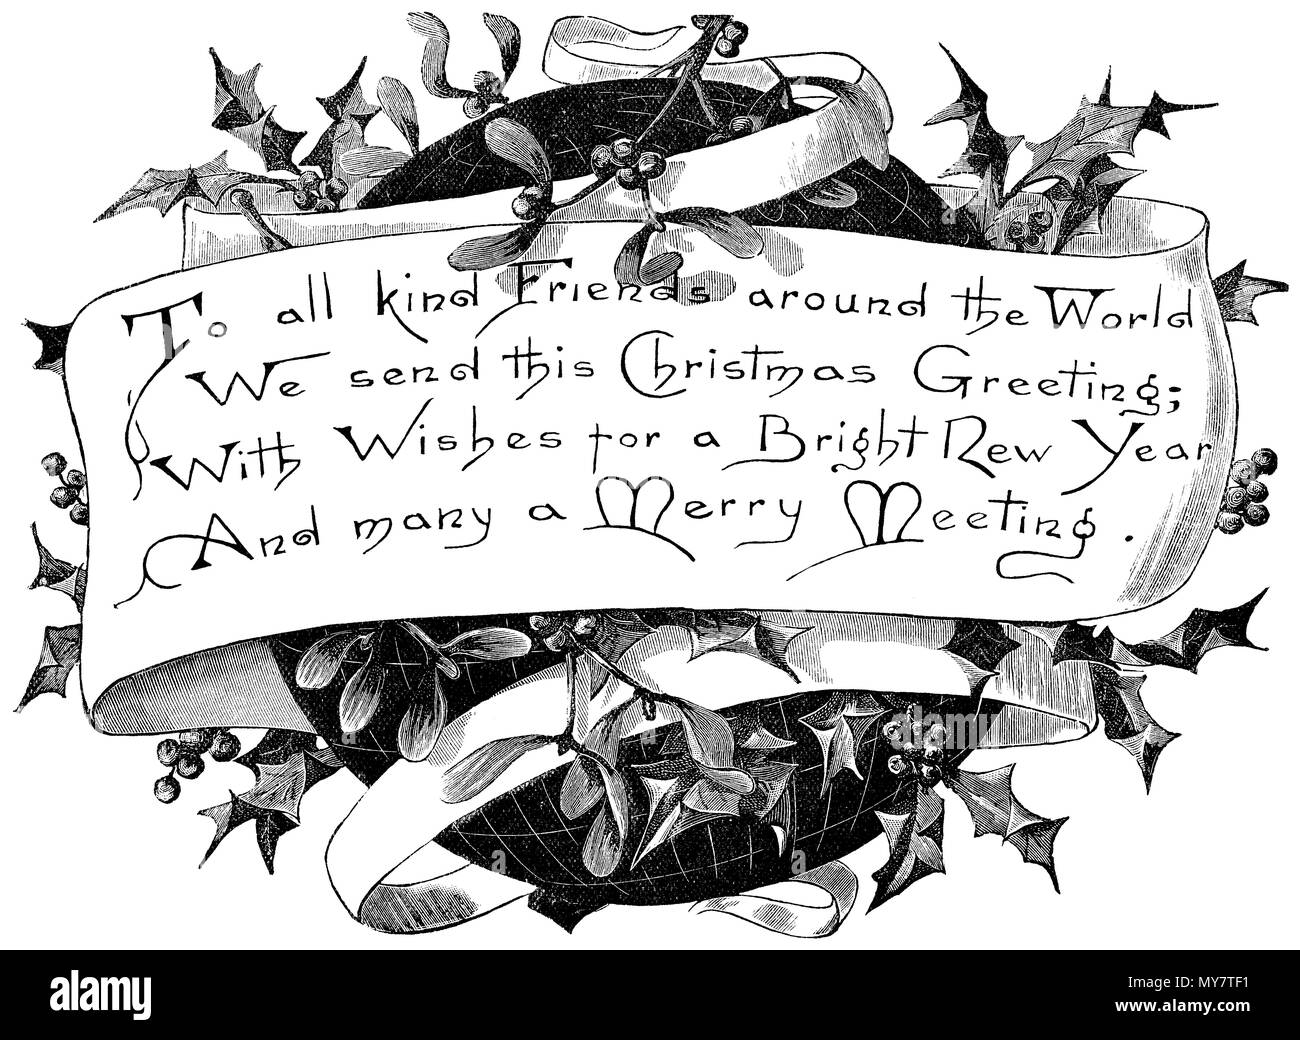 Christmas greetings engraving from The Boy's Own Paper Annual, Volume 13, 1890-1891. Illustrated by H.F. Hobden. Stock Photo